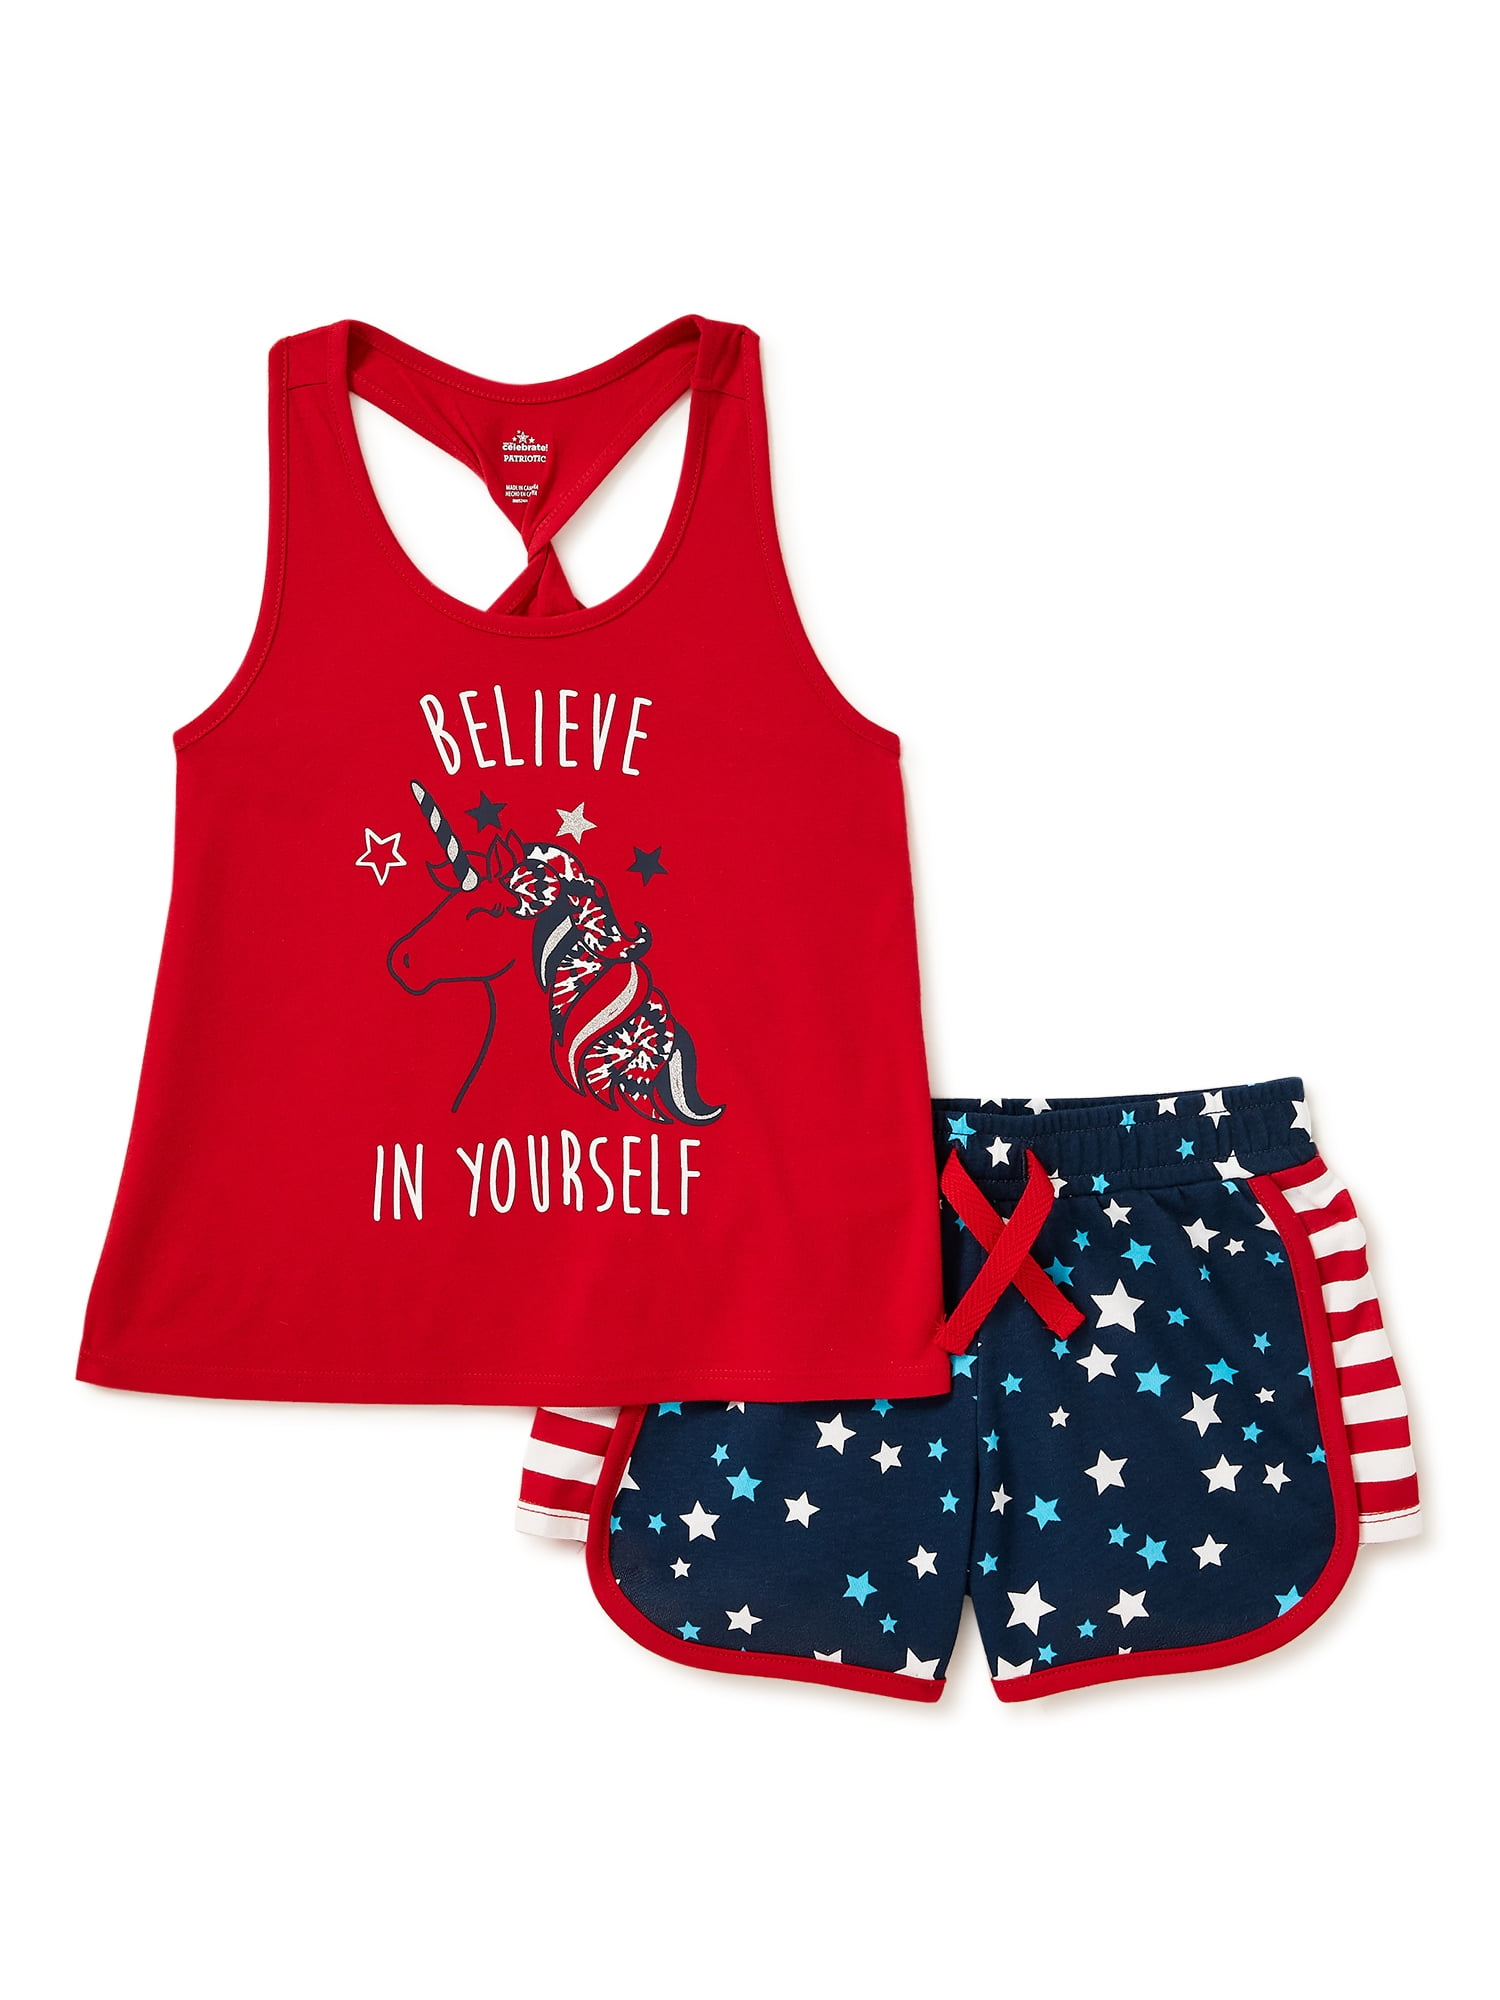 Girls Patriotic 4Th Of July Tank Top And Short, 2-Piece Outfit Set, Sizes  4-18 - Walmart.com